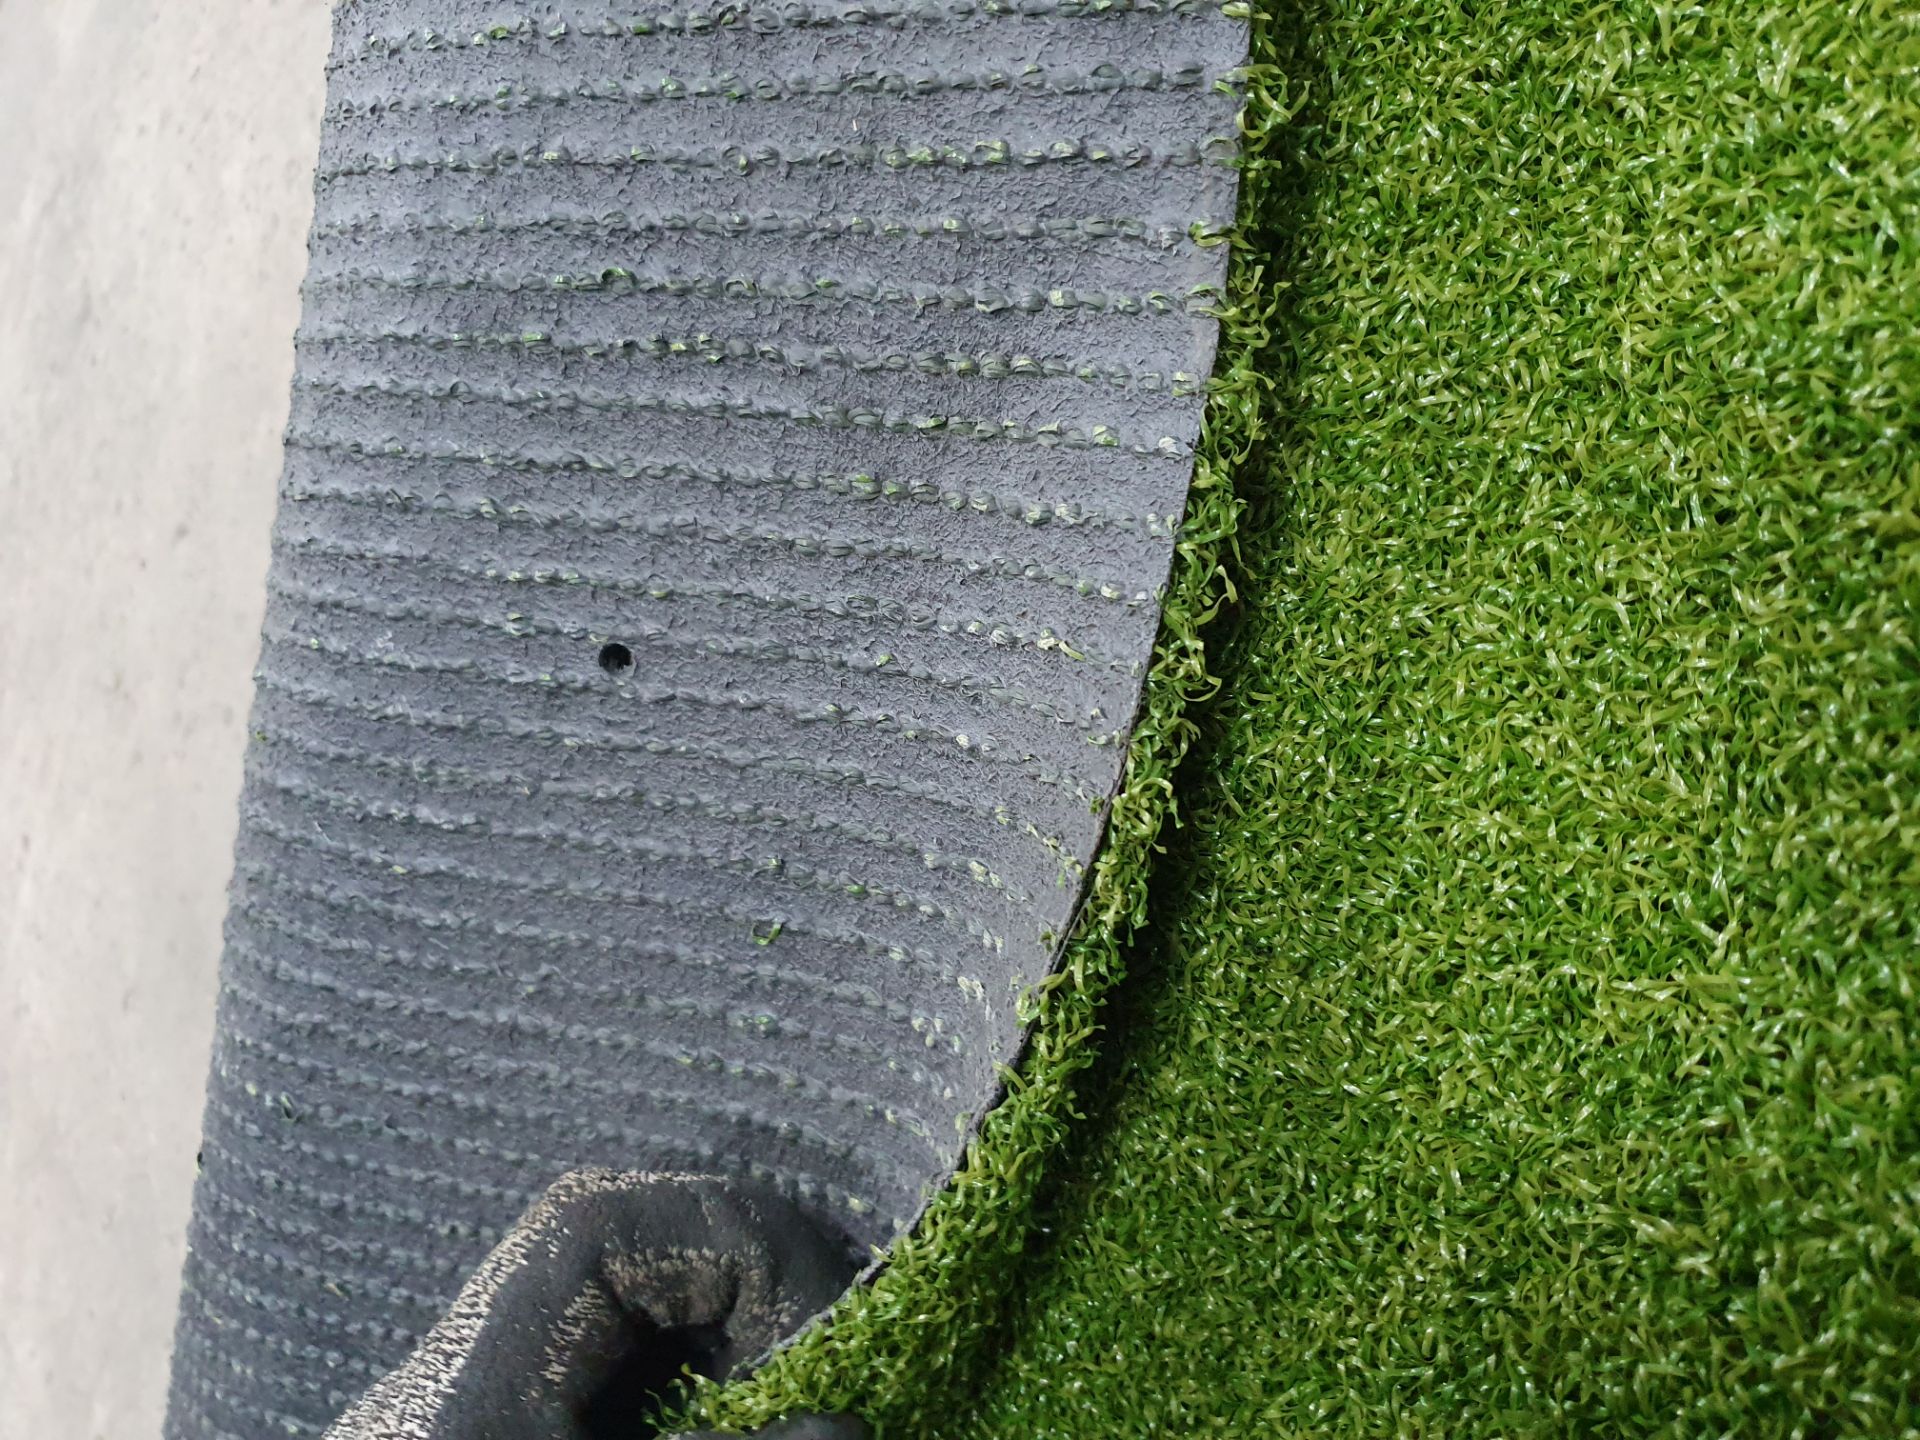 Roll of Green Artificial Grass | Approximate size: 1.7m x 2.6m - Image 3 of 3